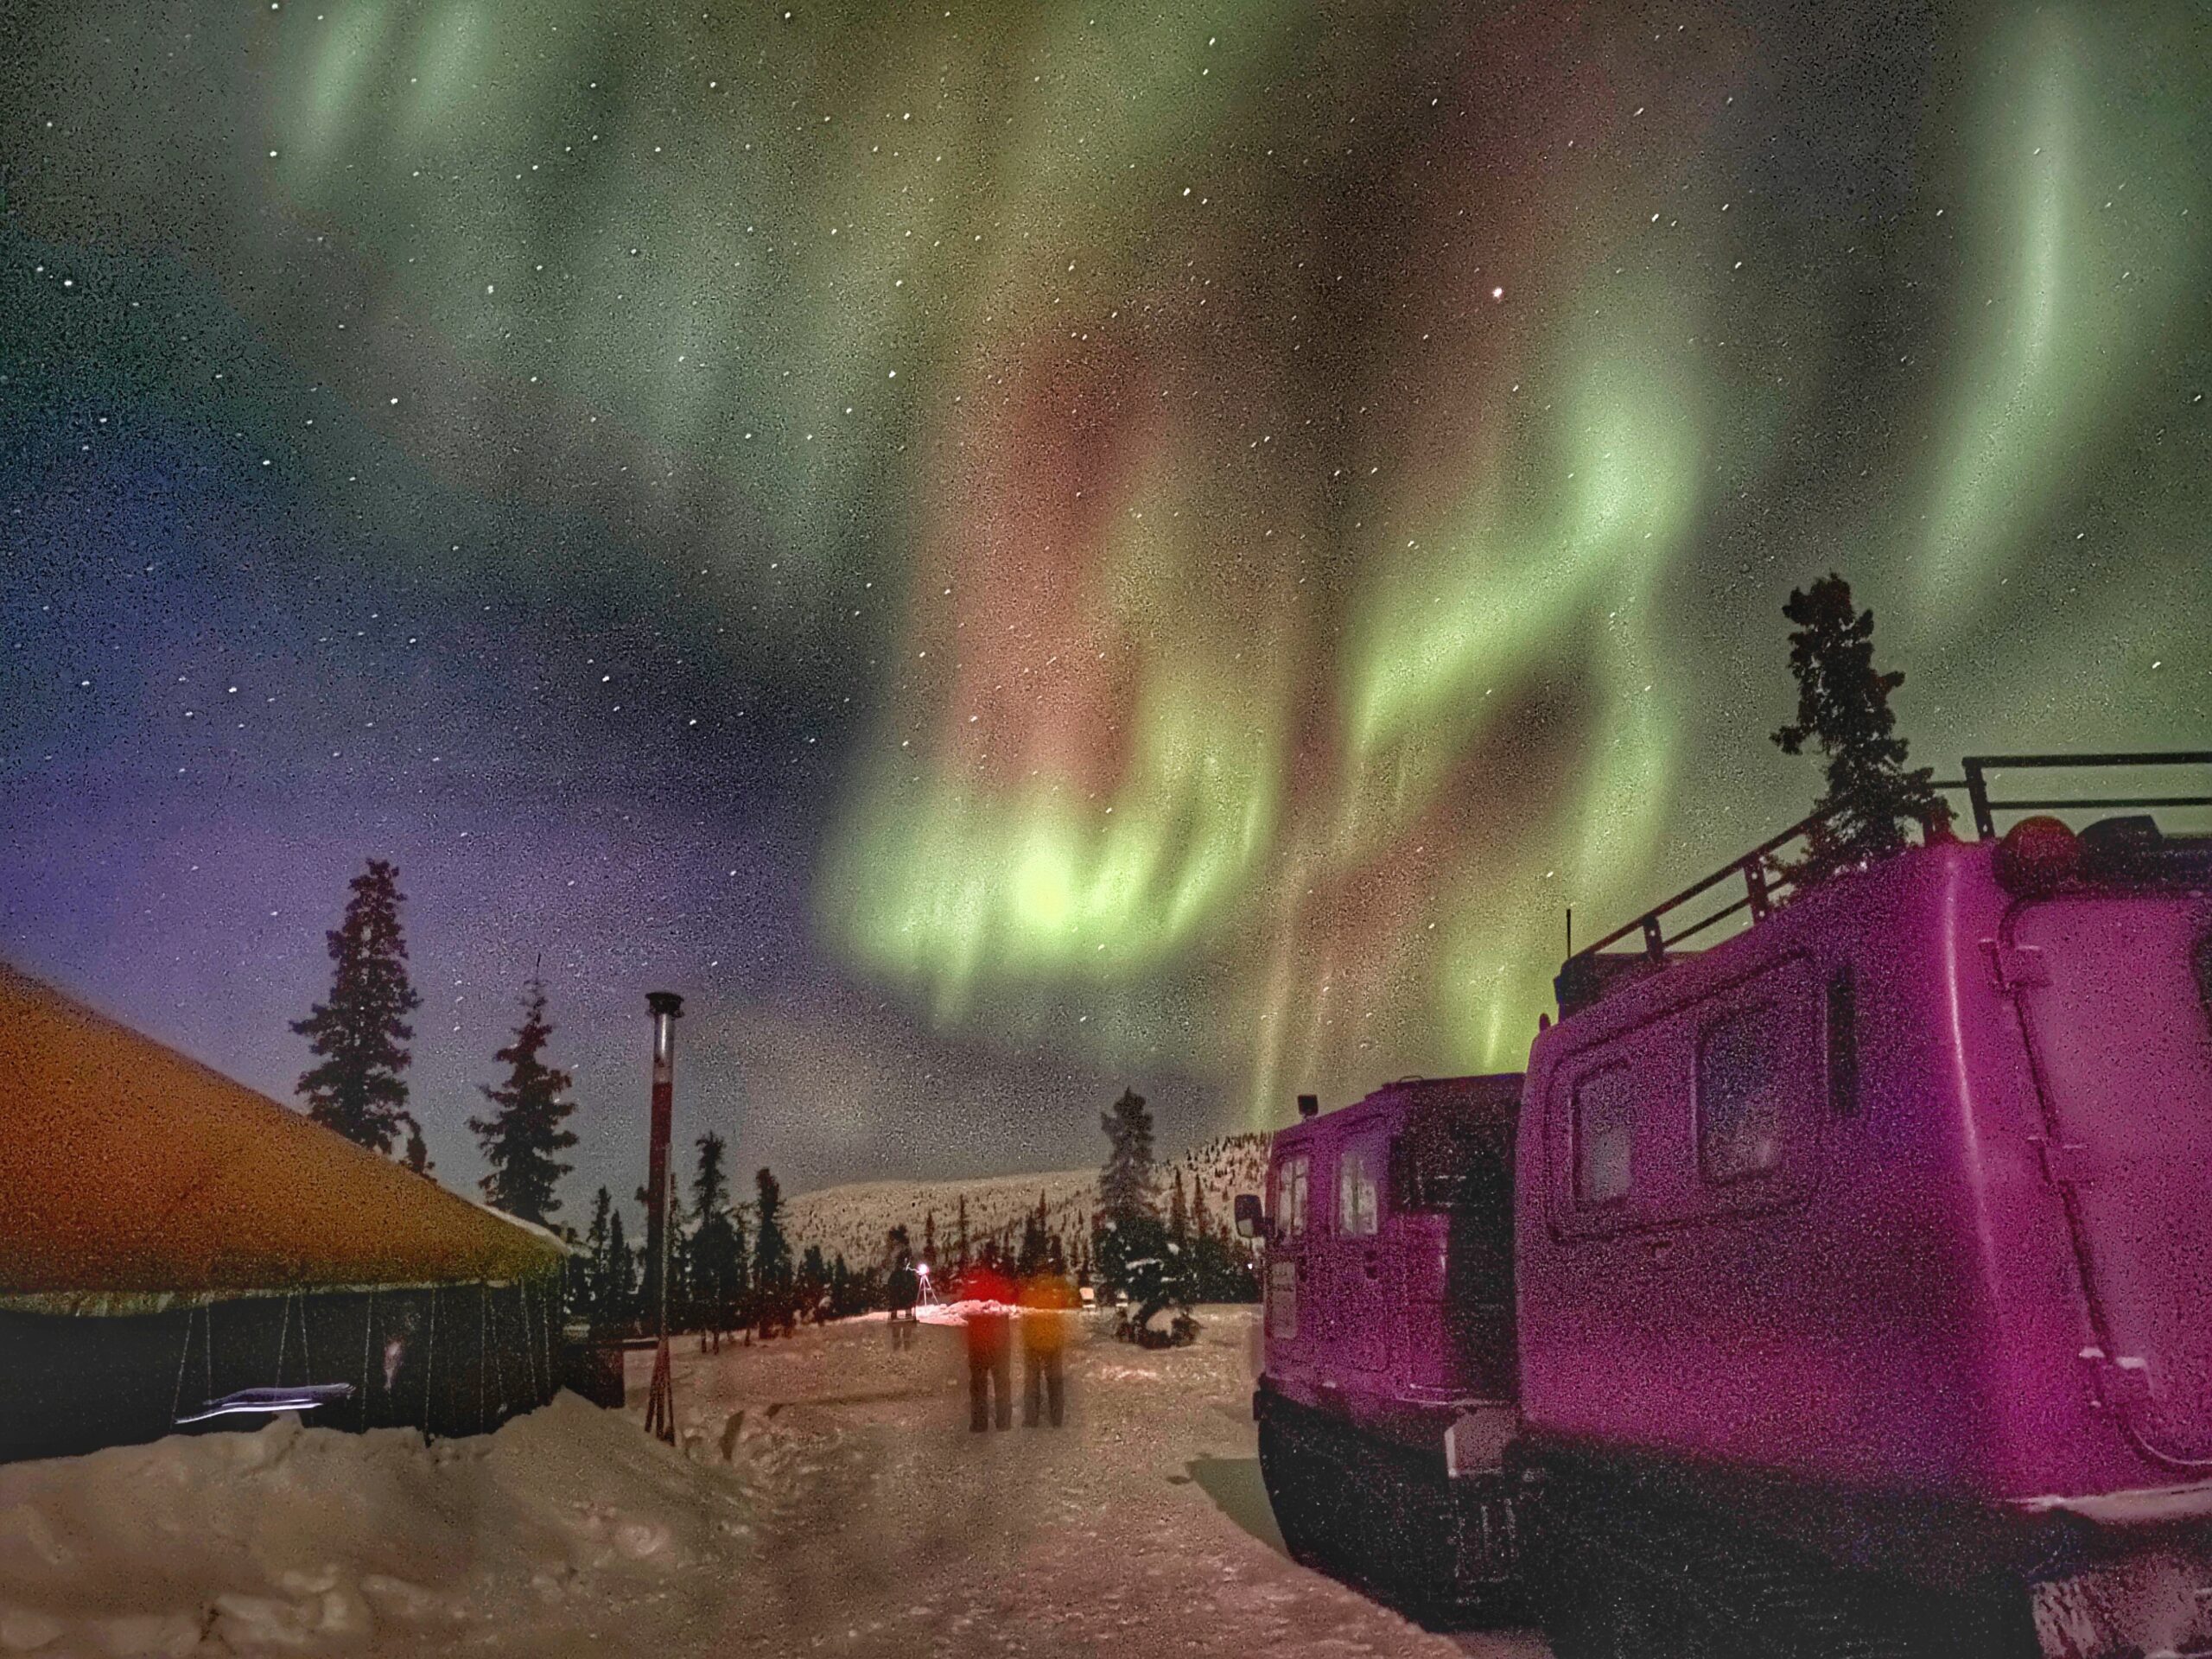 How To See The Northern Lights in Alaska